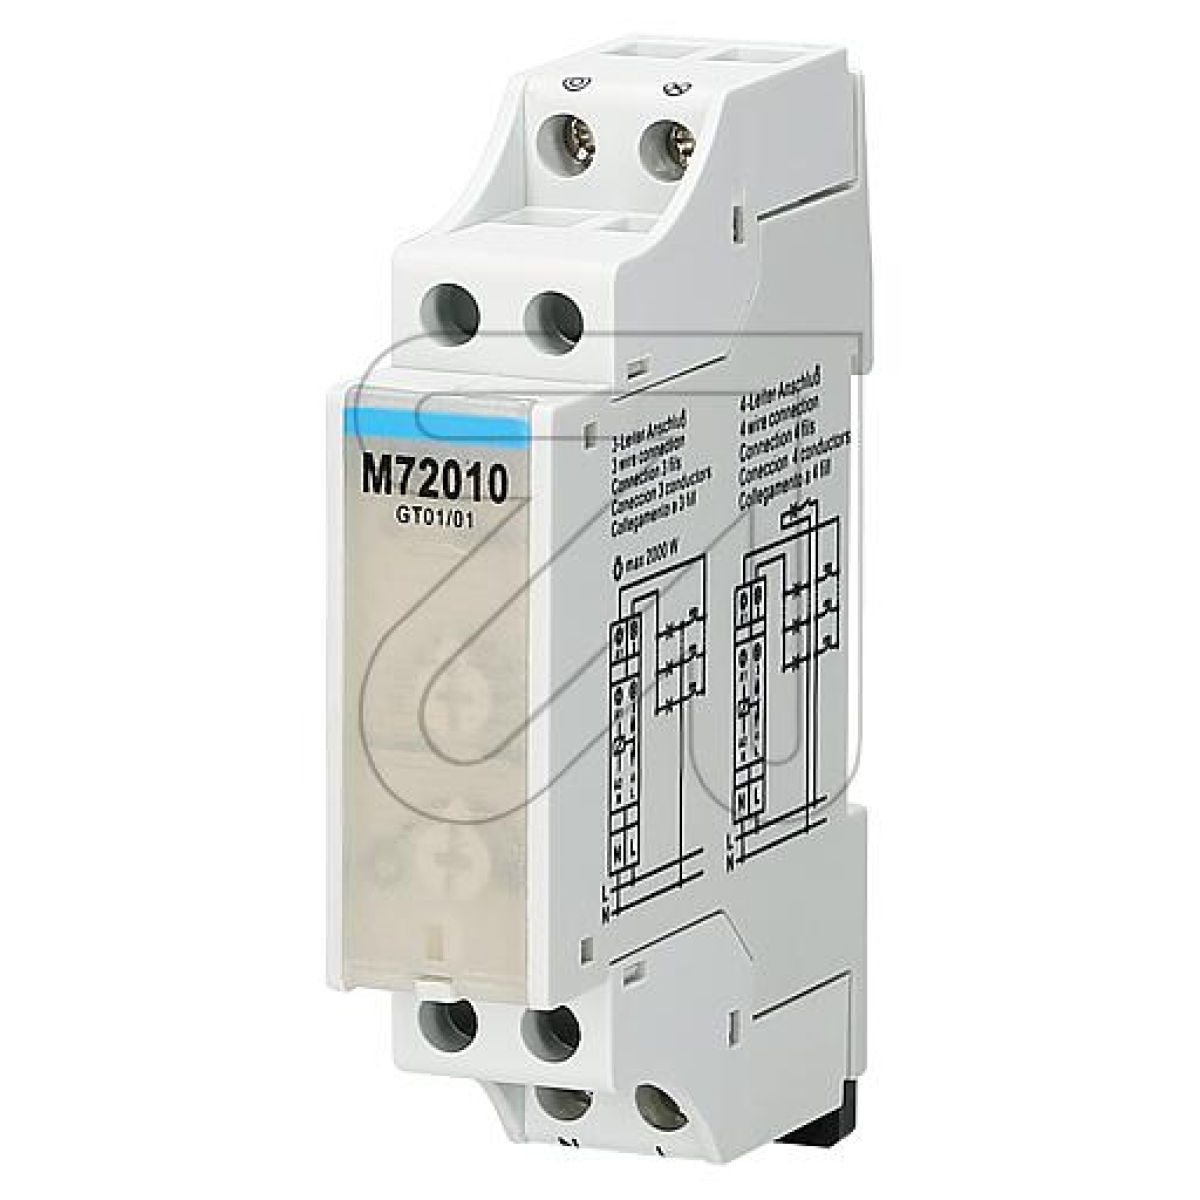 Staircase light time switch 072010Article-No: 112450